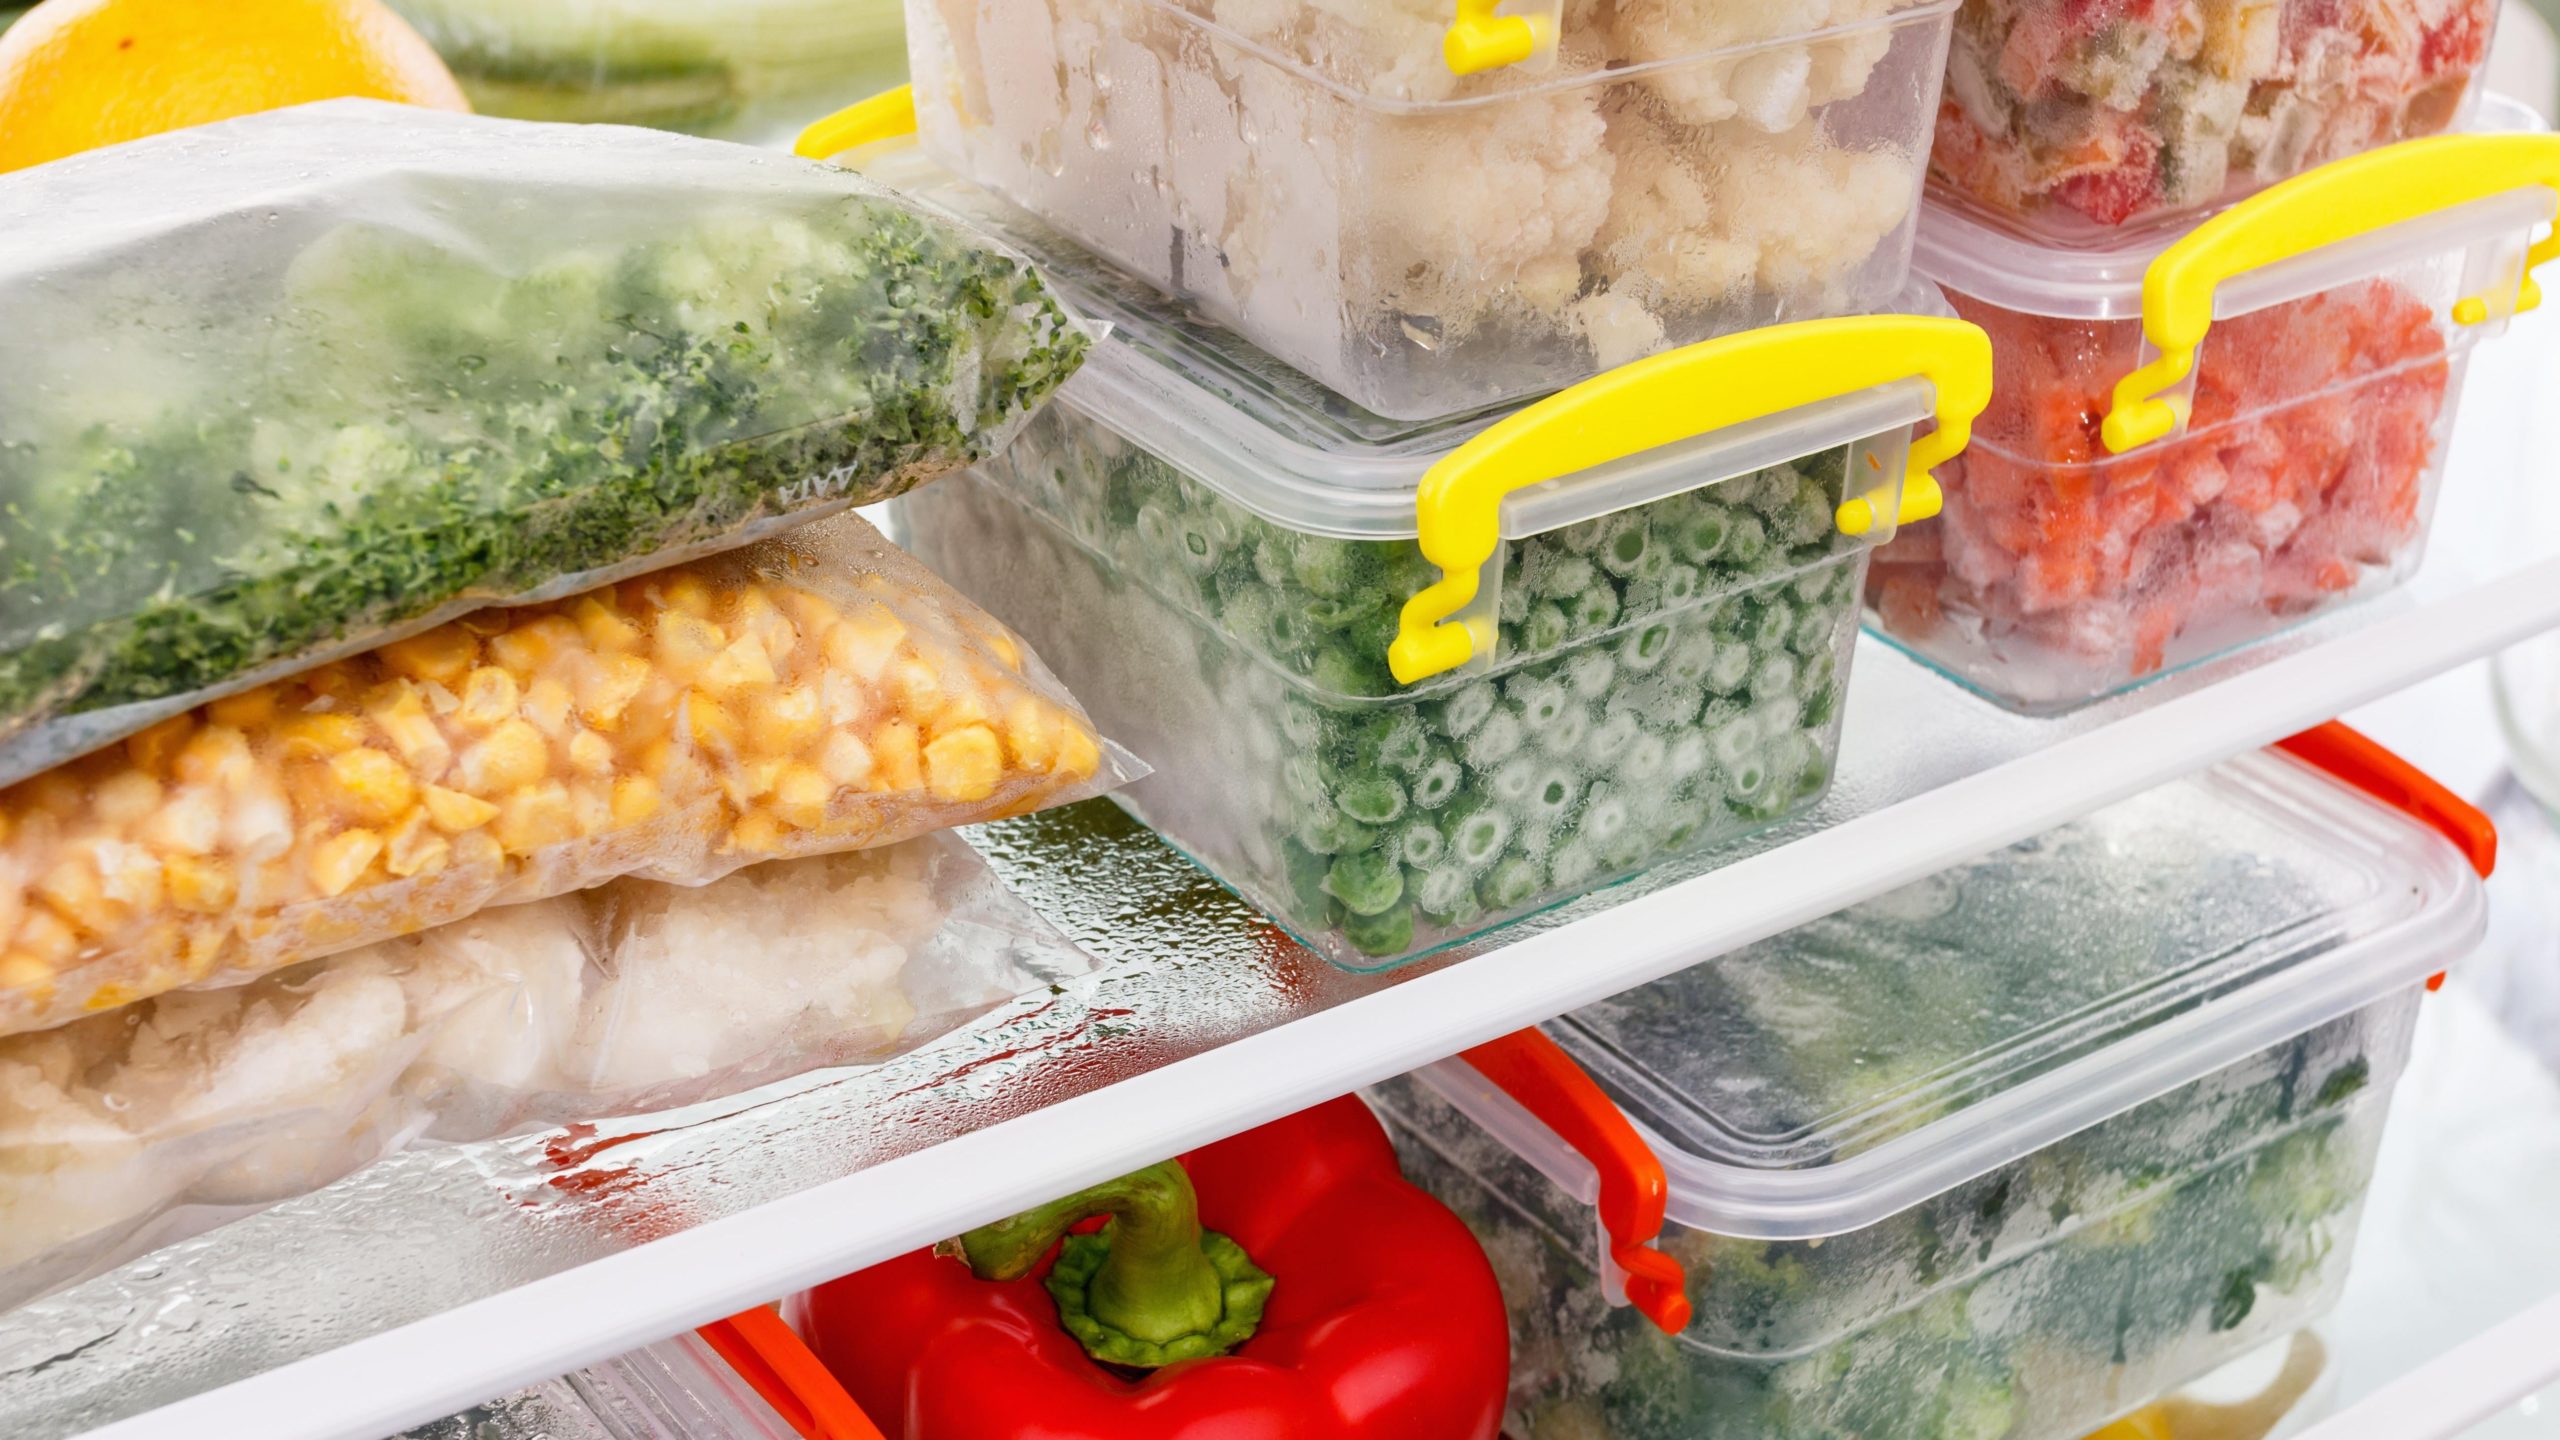 Start Your Year With This Deep, Sensual Freezer Reorganization